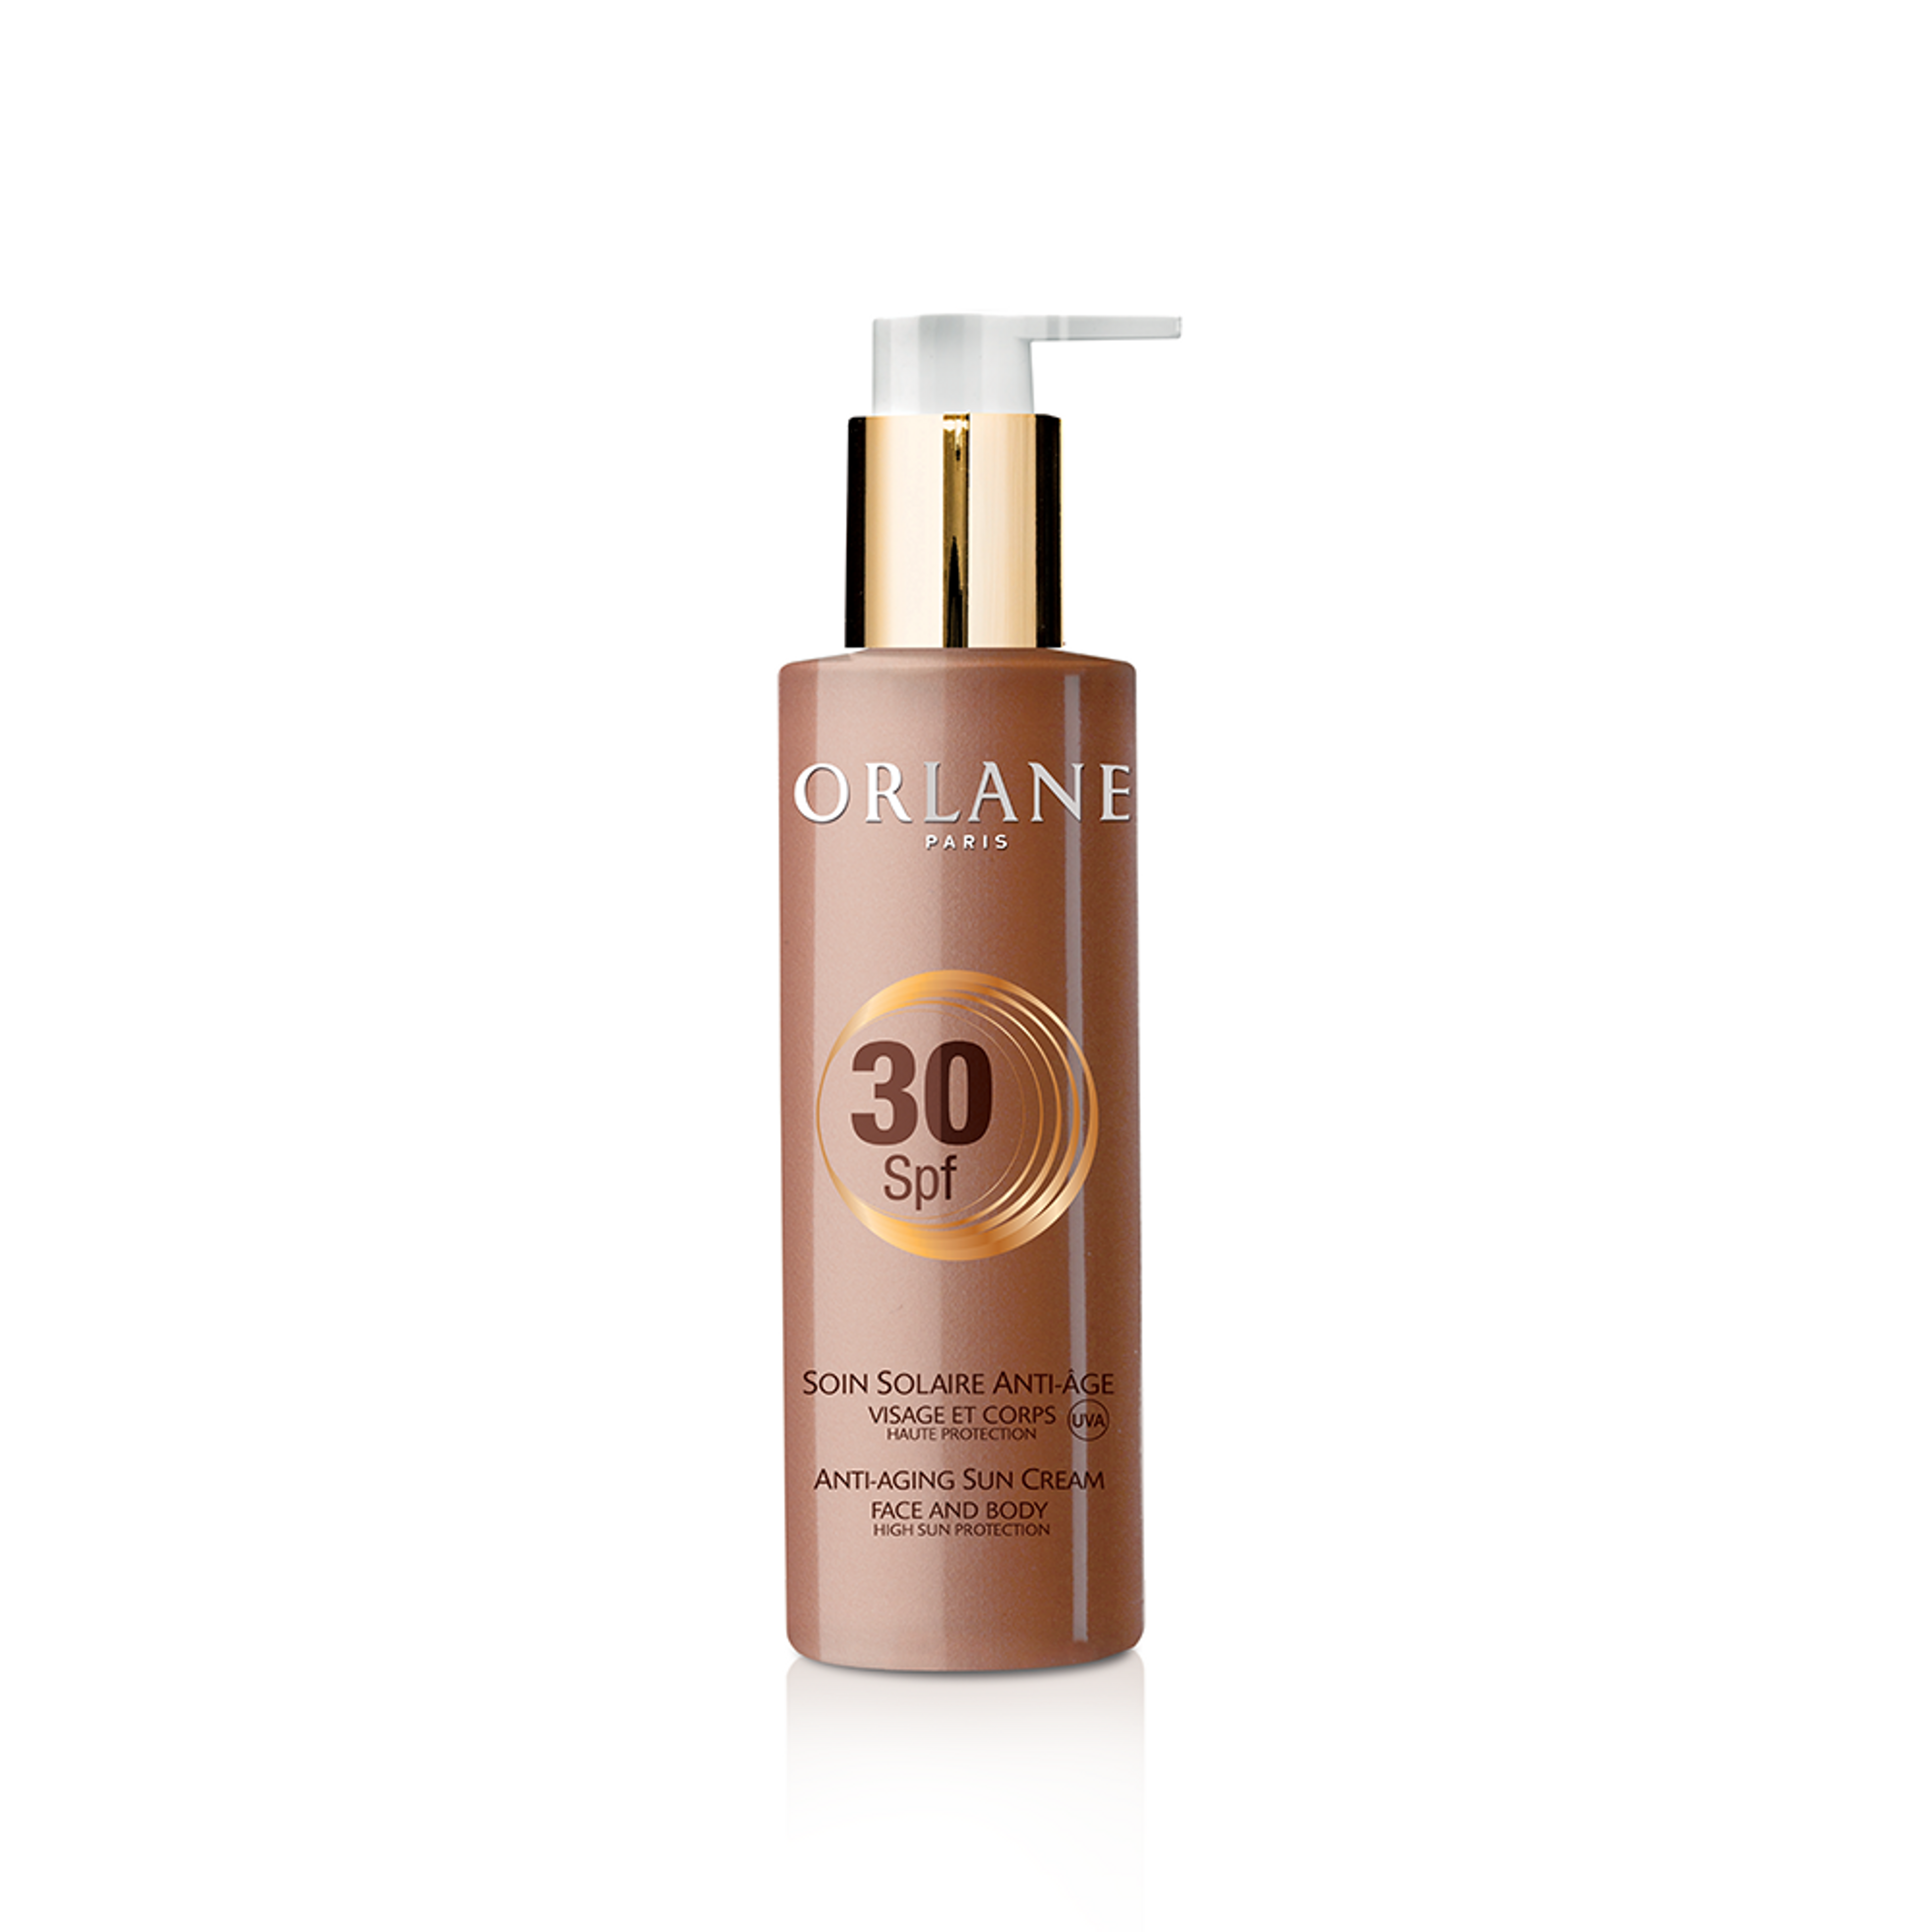 Orlane Soin Solaires Anti-age Visage Et Corps Spf 30 1